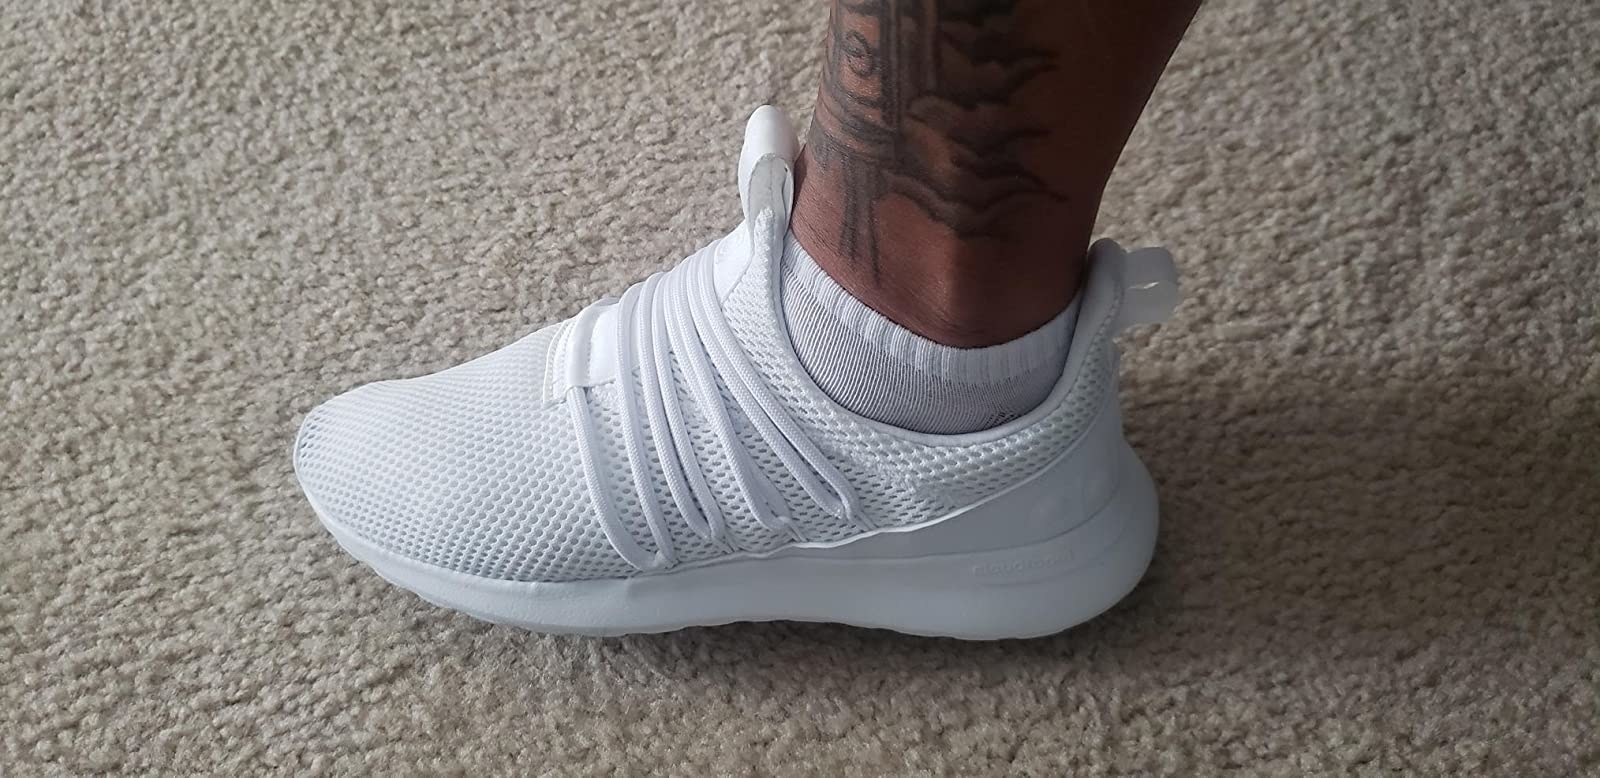 A reviewer wearing the laced white shoe made of mesh fabric with a loop on the heel